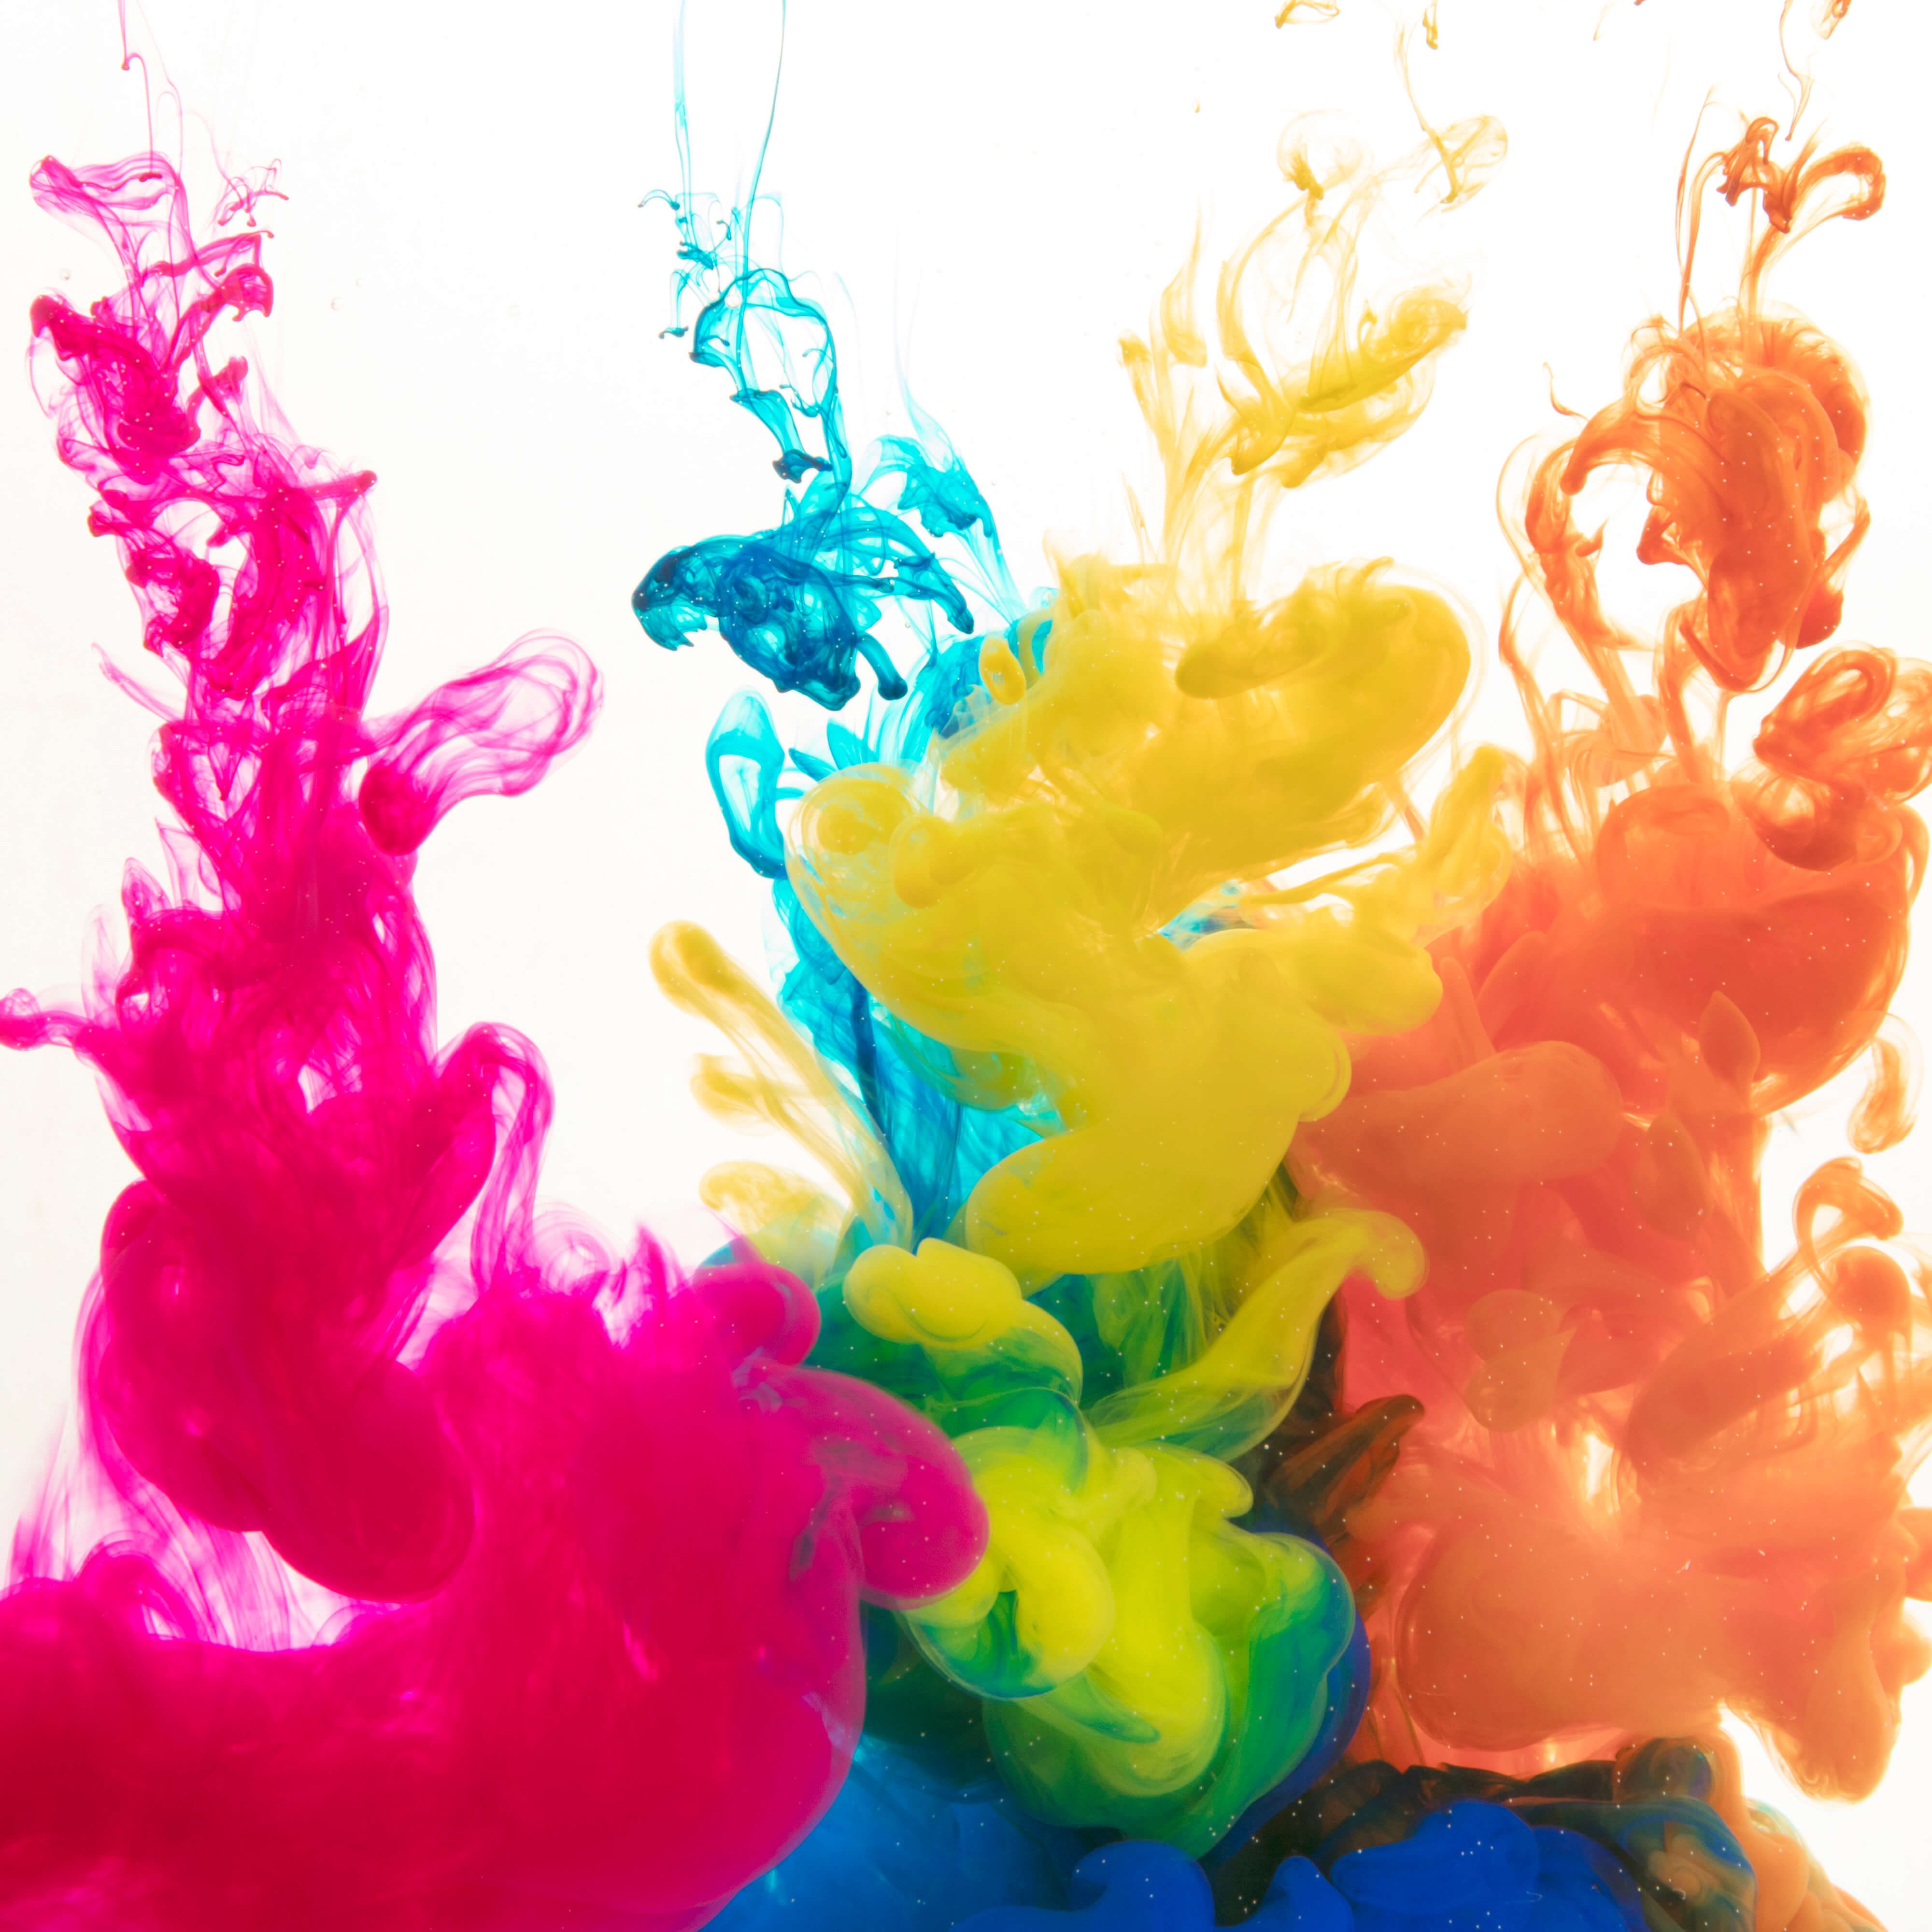 DuPont introduces new series of pigment inks